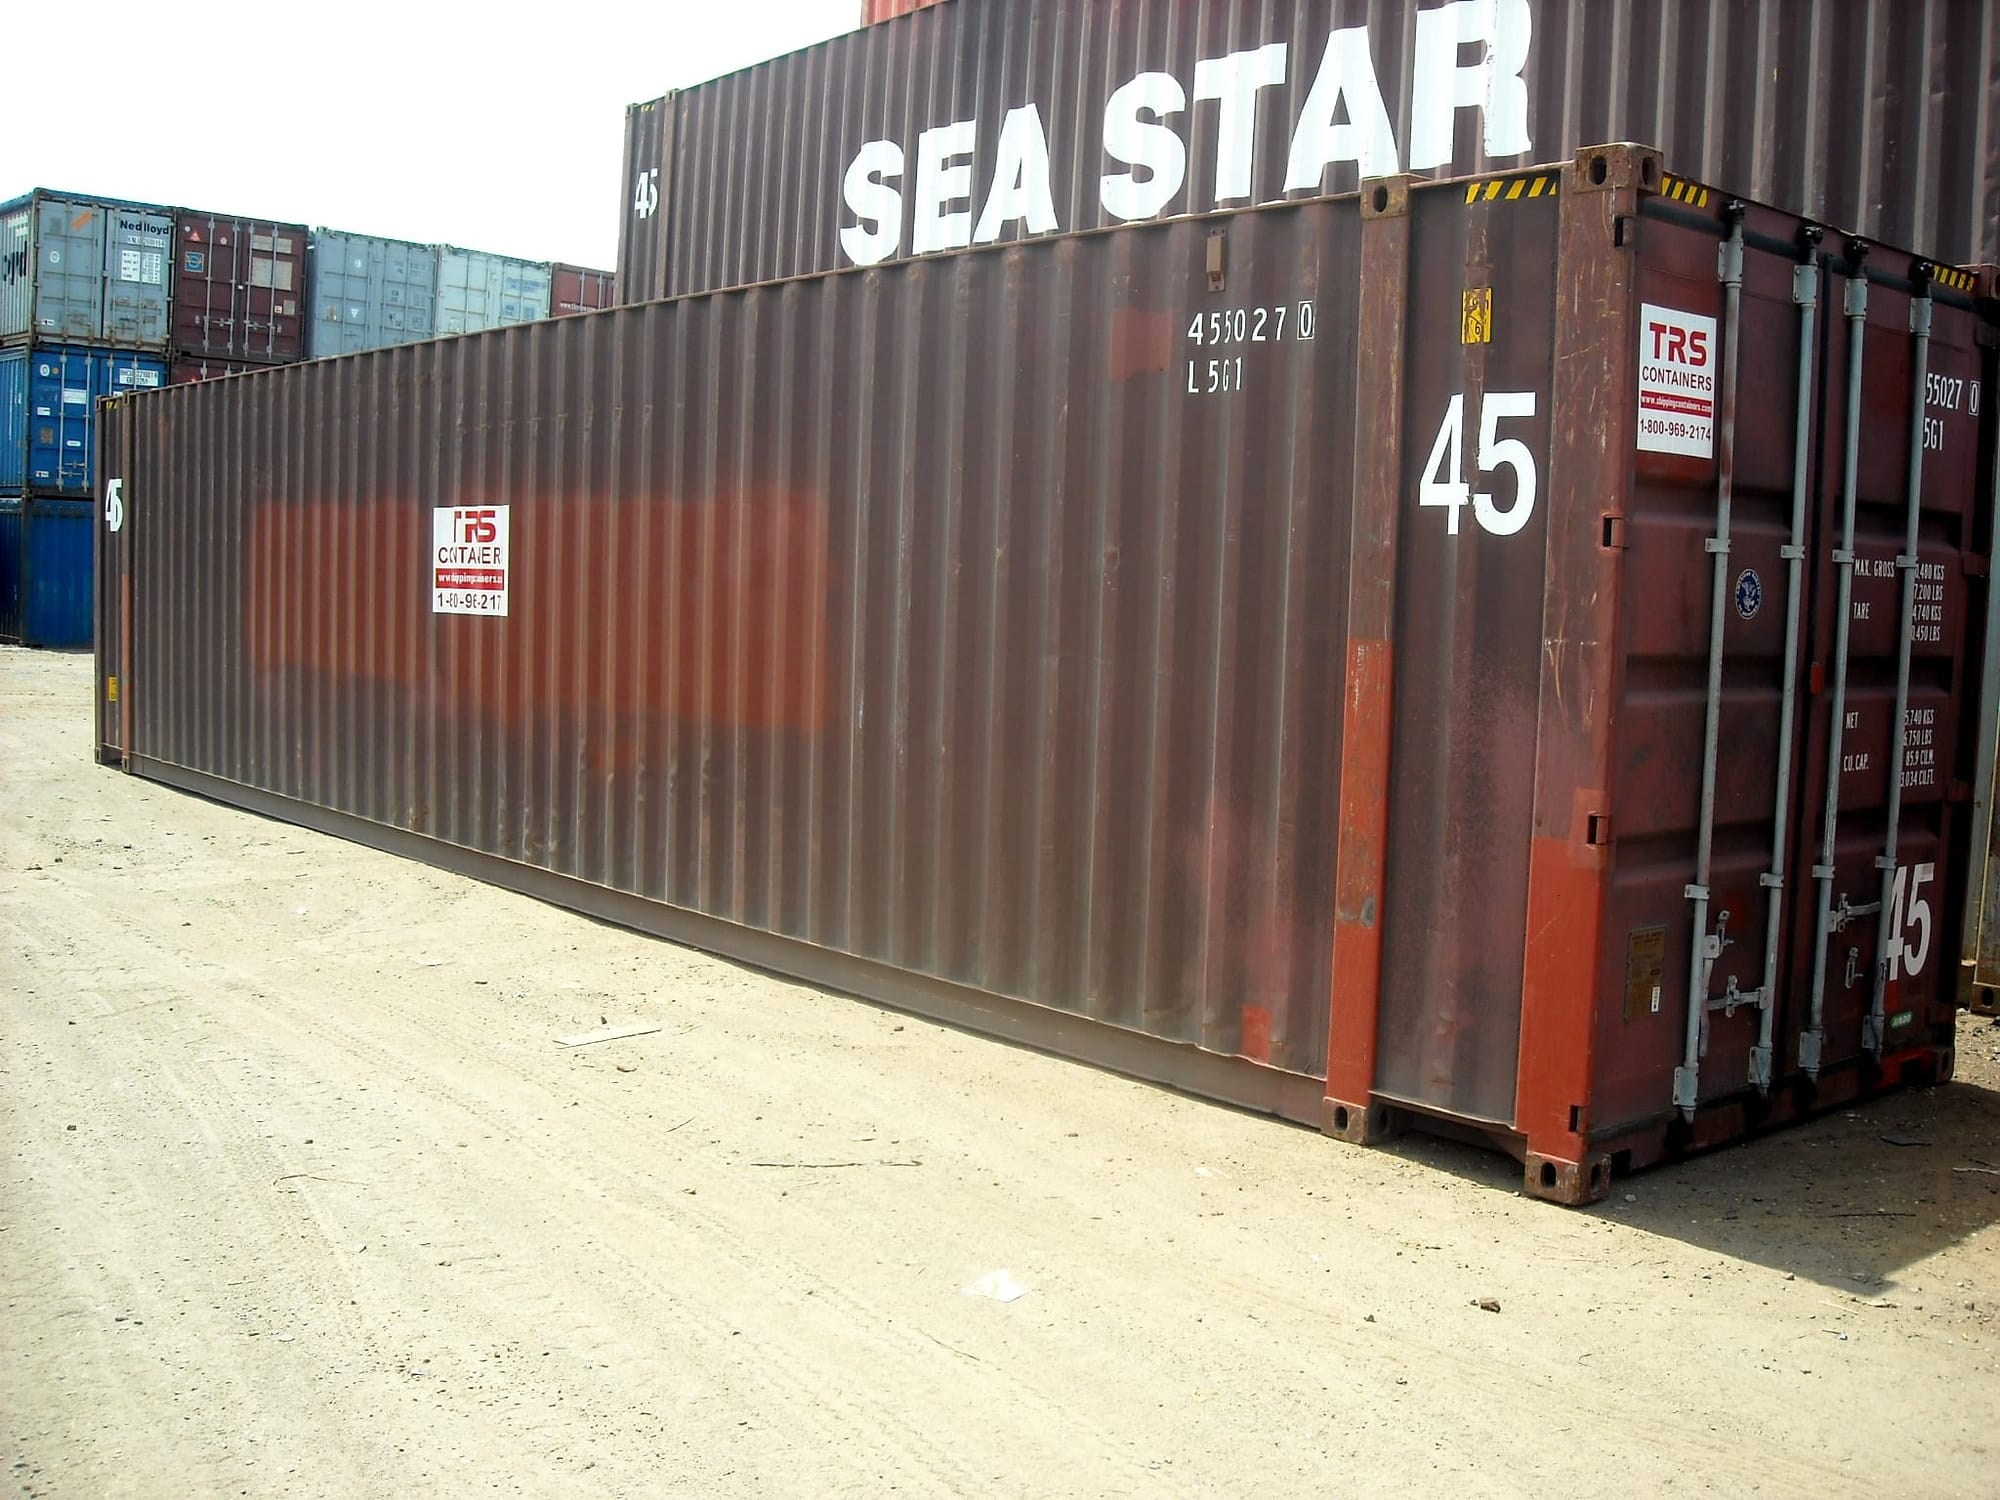 TRS Containers sells steel intermodal containers in 45 foot lengths